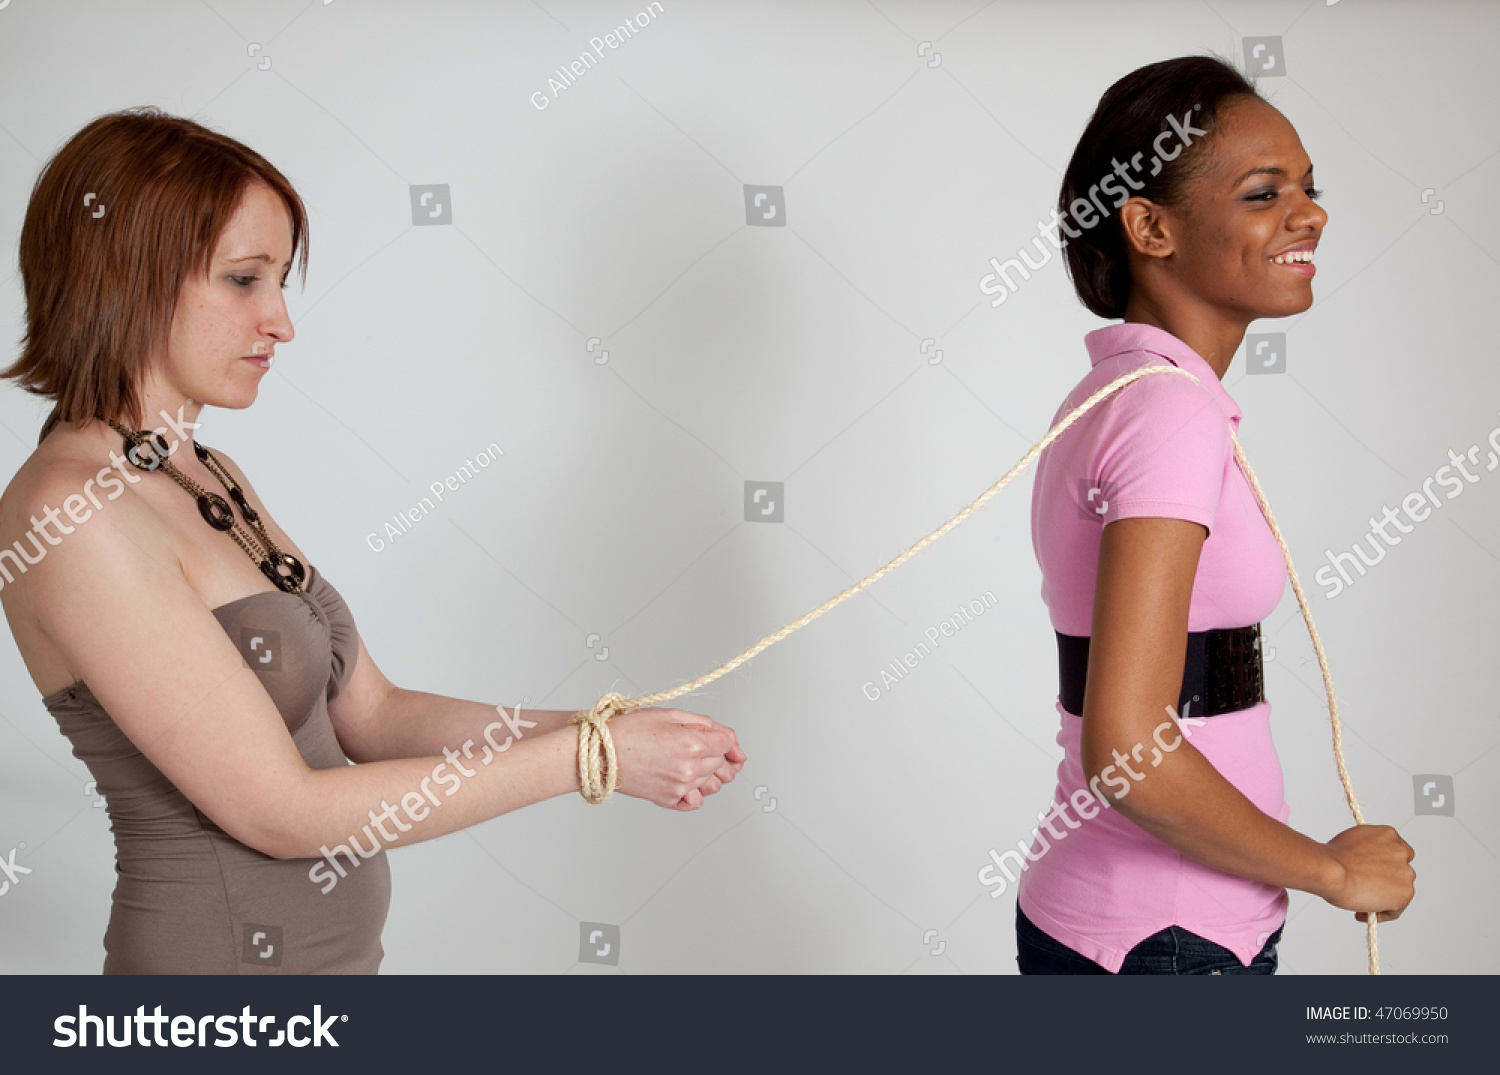 black woman tied up